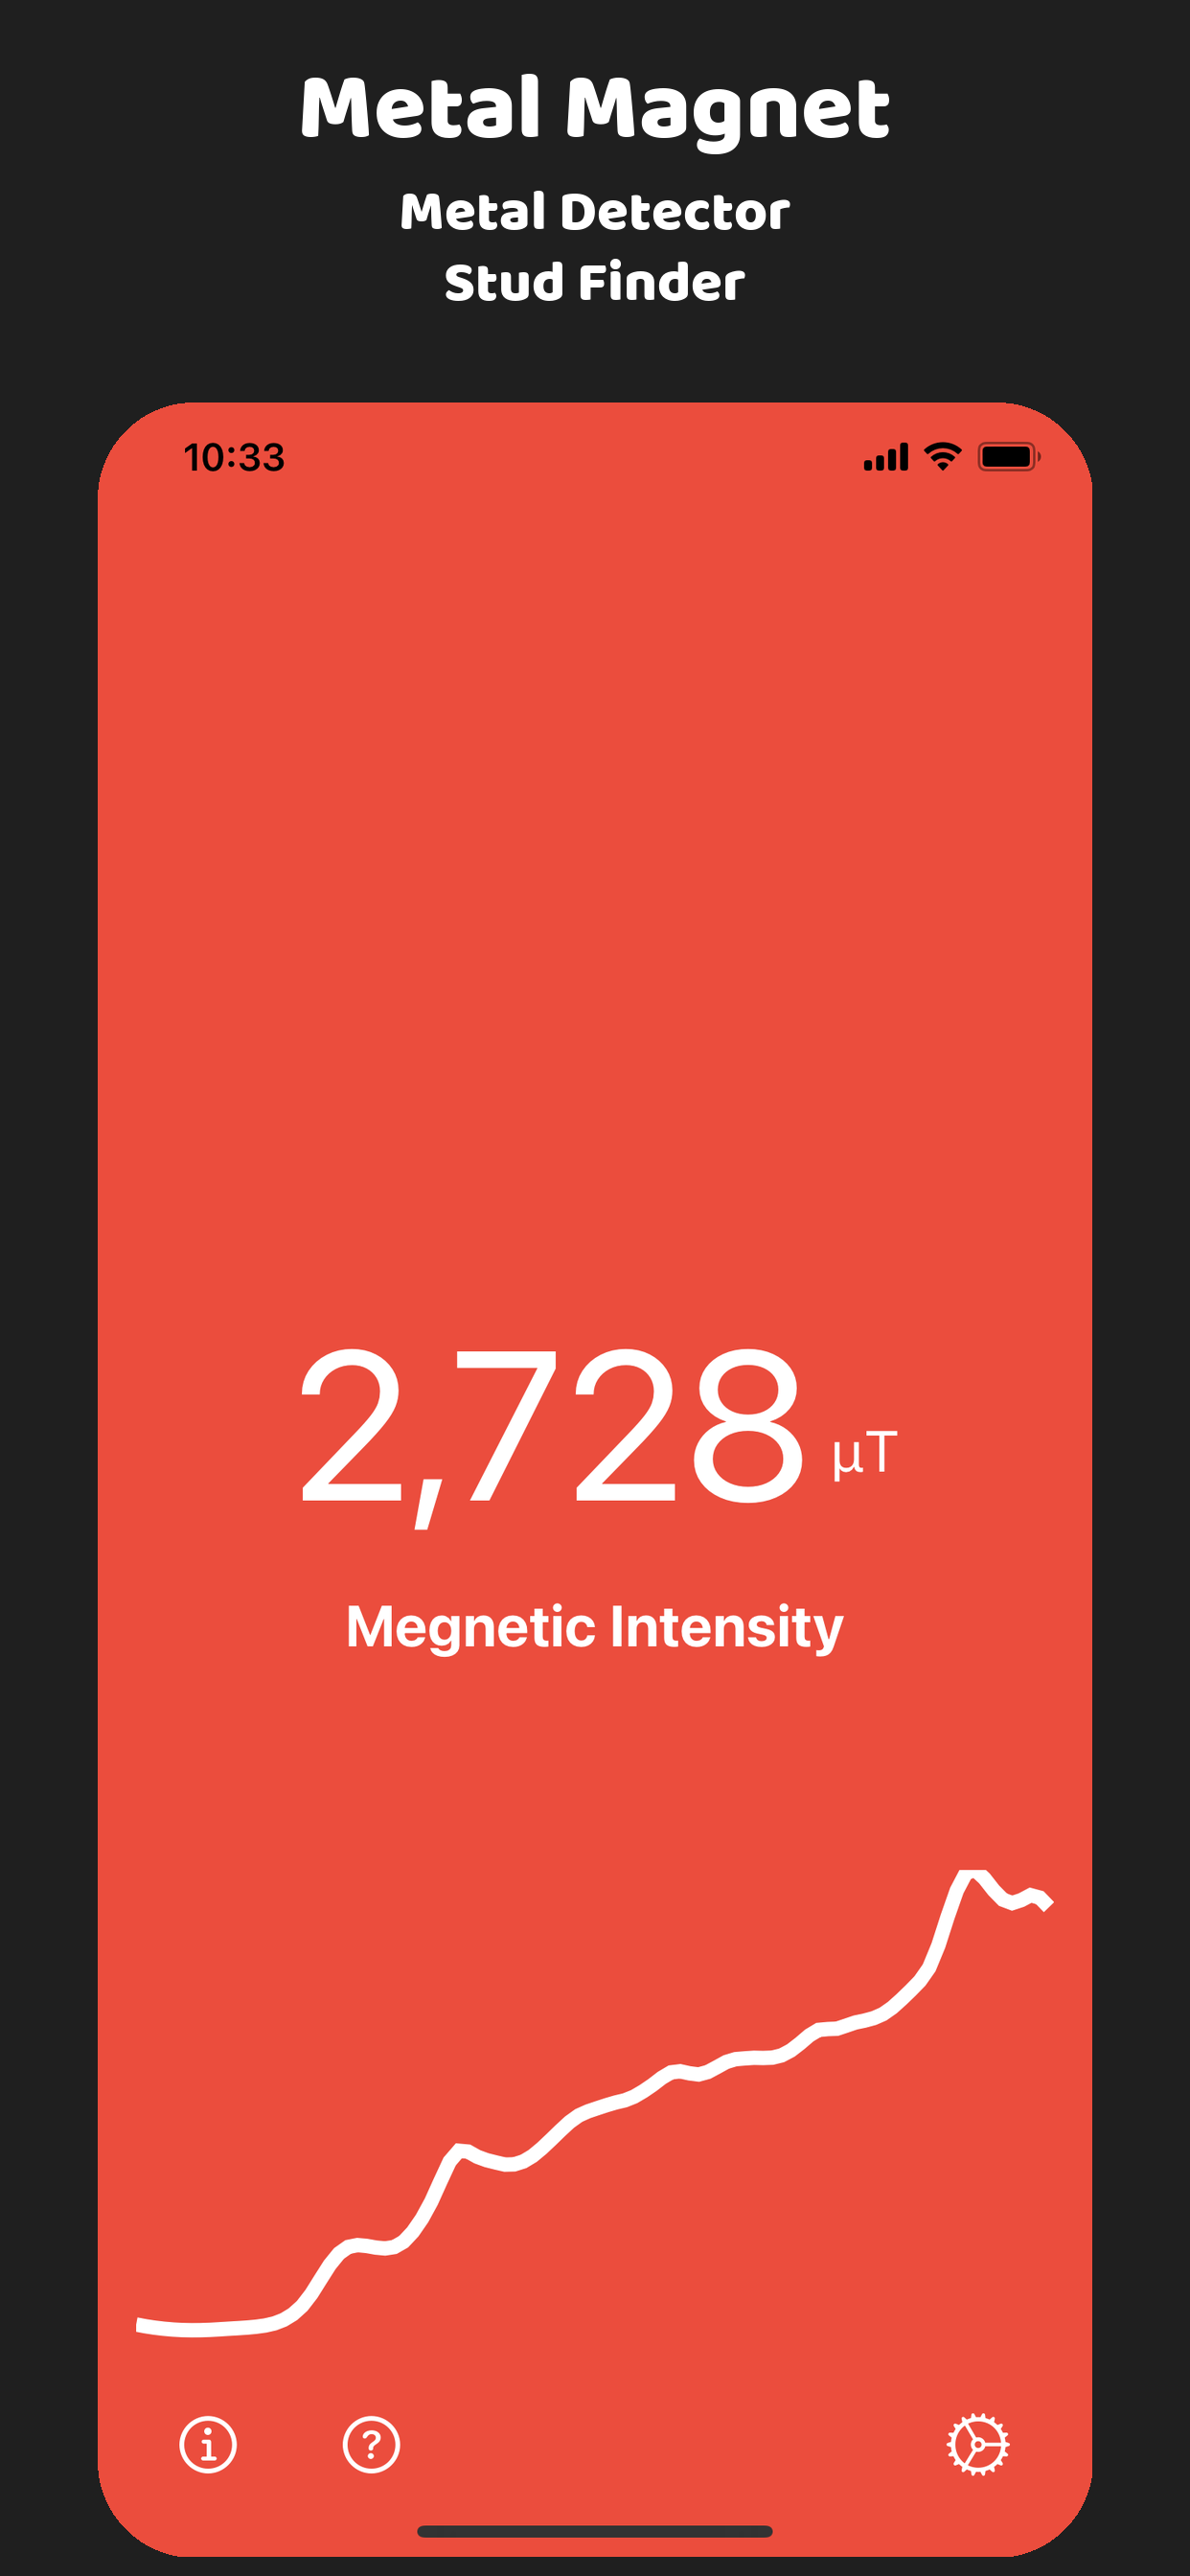 Metal Magnet for iOS by Eric David Smith